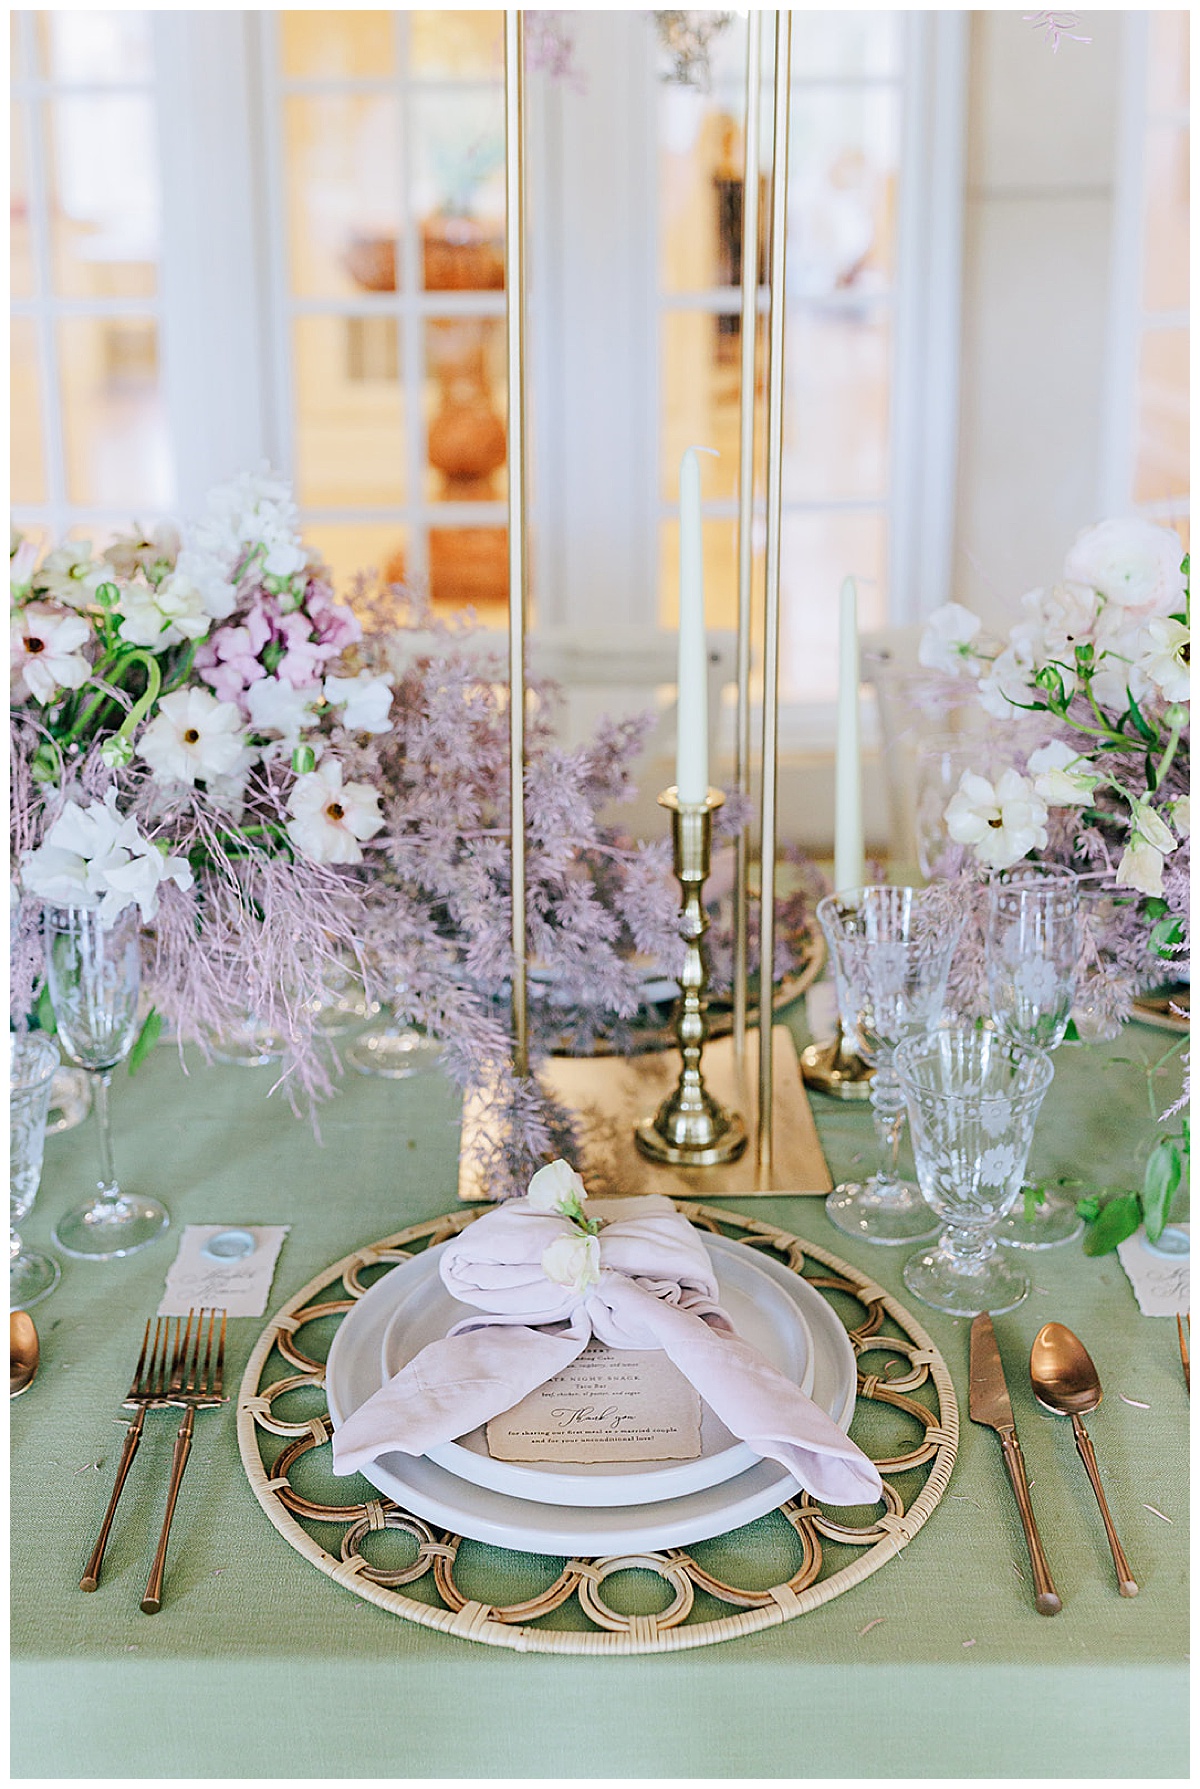 Gorgeous wedding table setting in purple and blush tones for Detroit Wedding Photographer